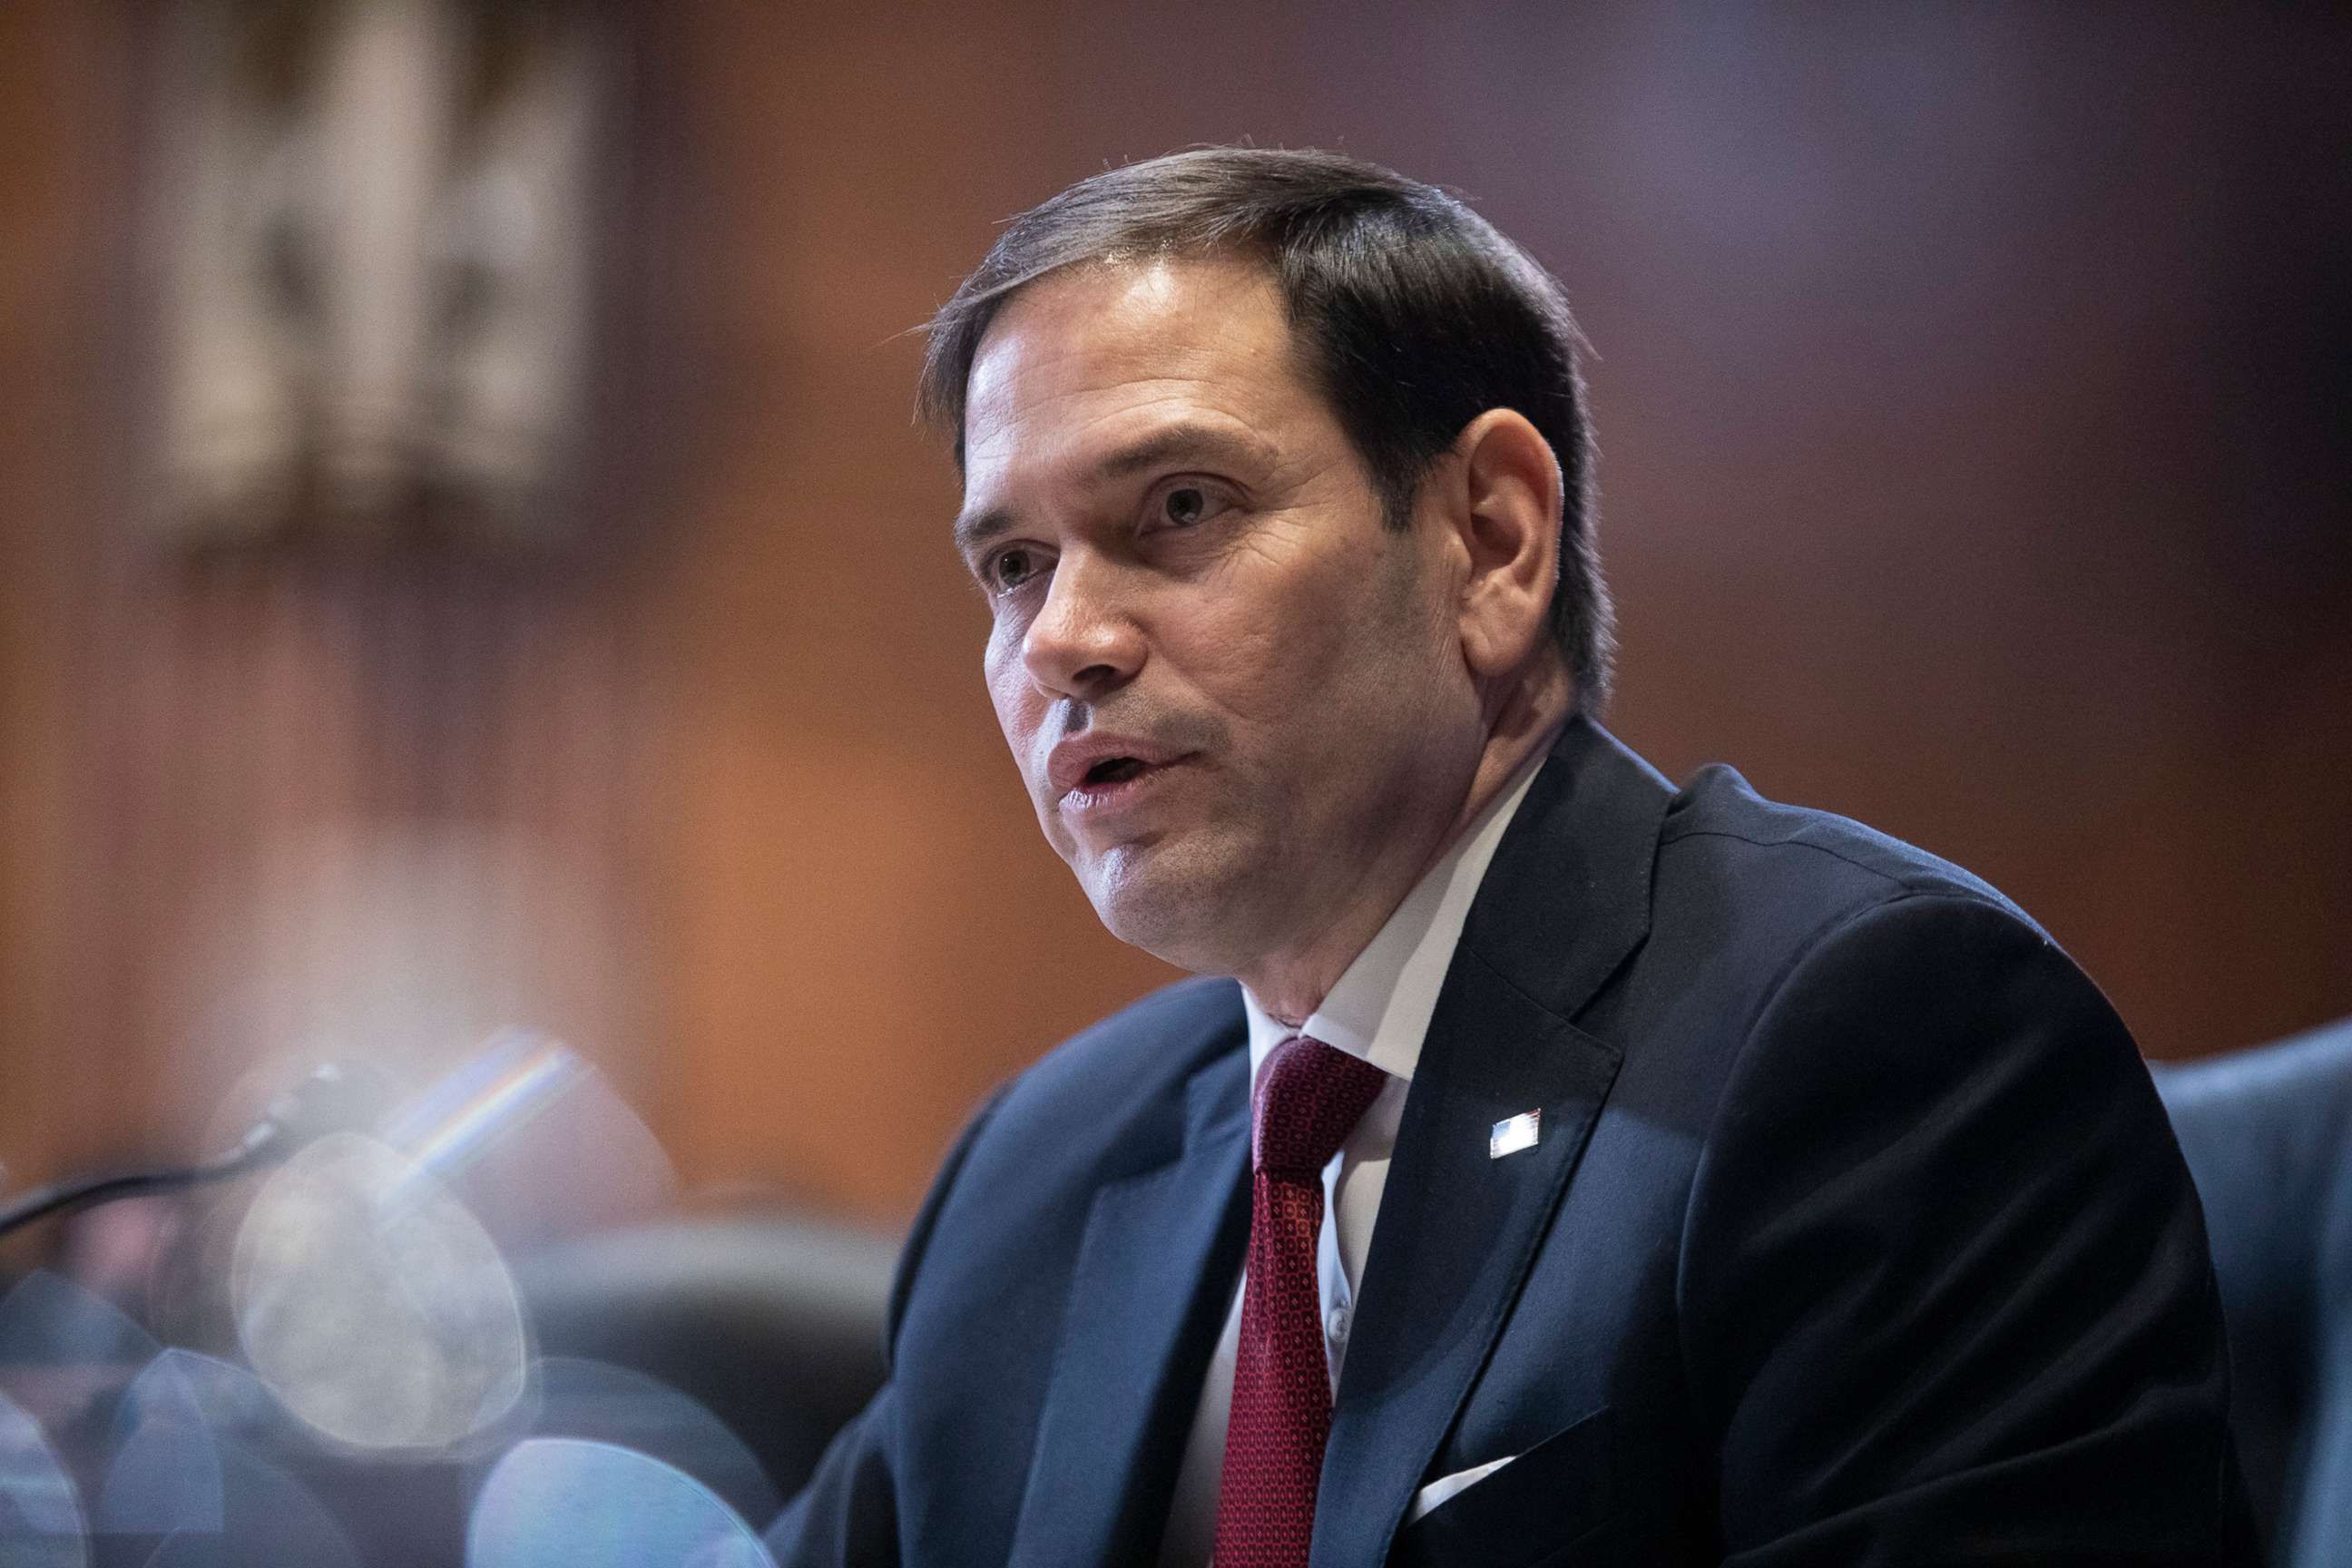 PHOTO: Sen. Marco Rubio speaks during a Senate Appropriations Subcommittee on Labor, Health and Human Services, Education, and Related Agencies hearing on Capitol Hill, May 17, 2022